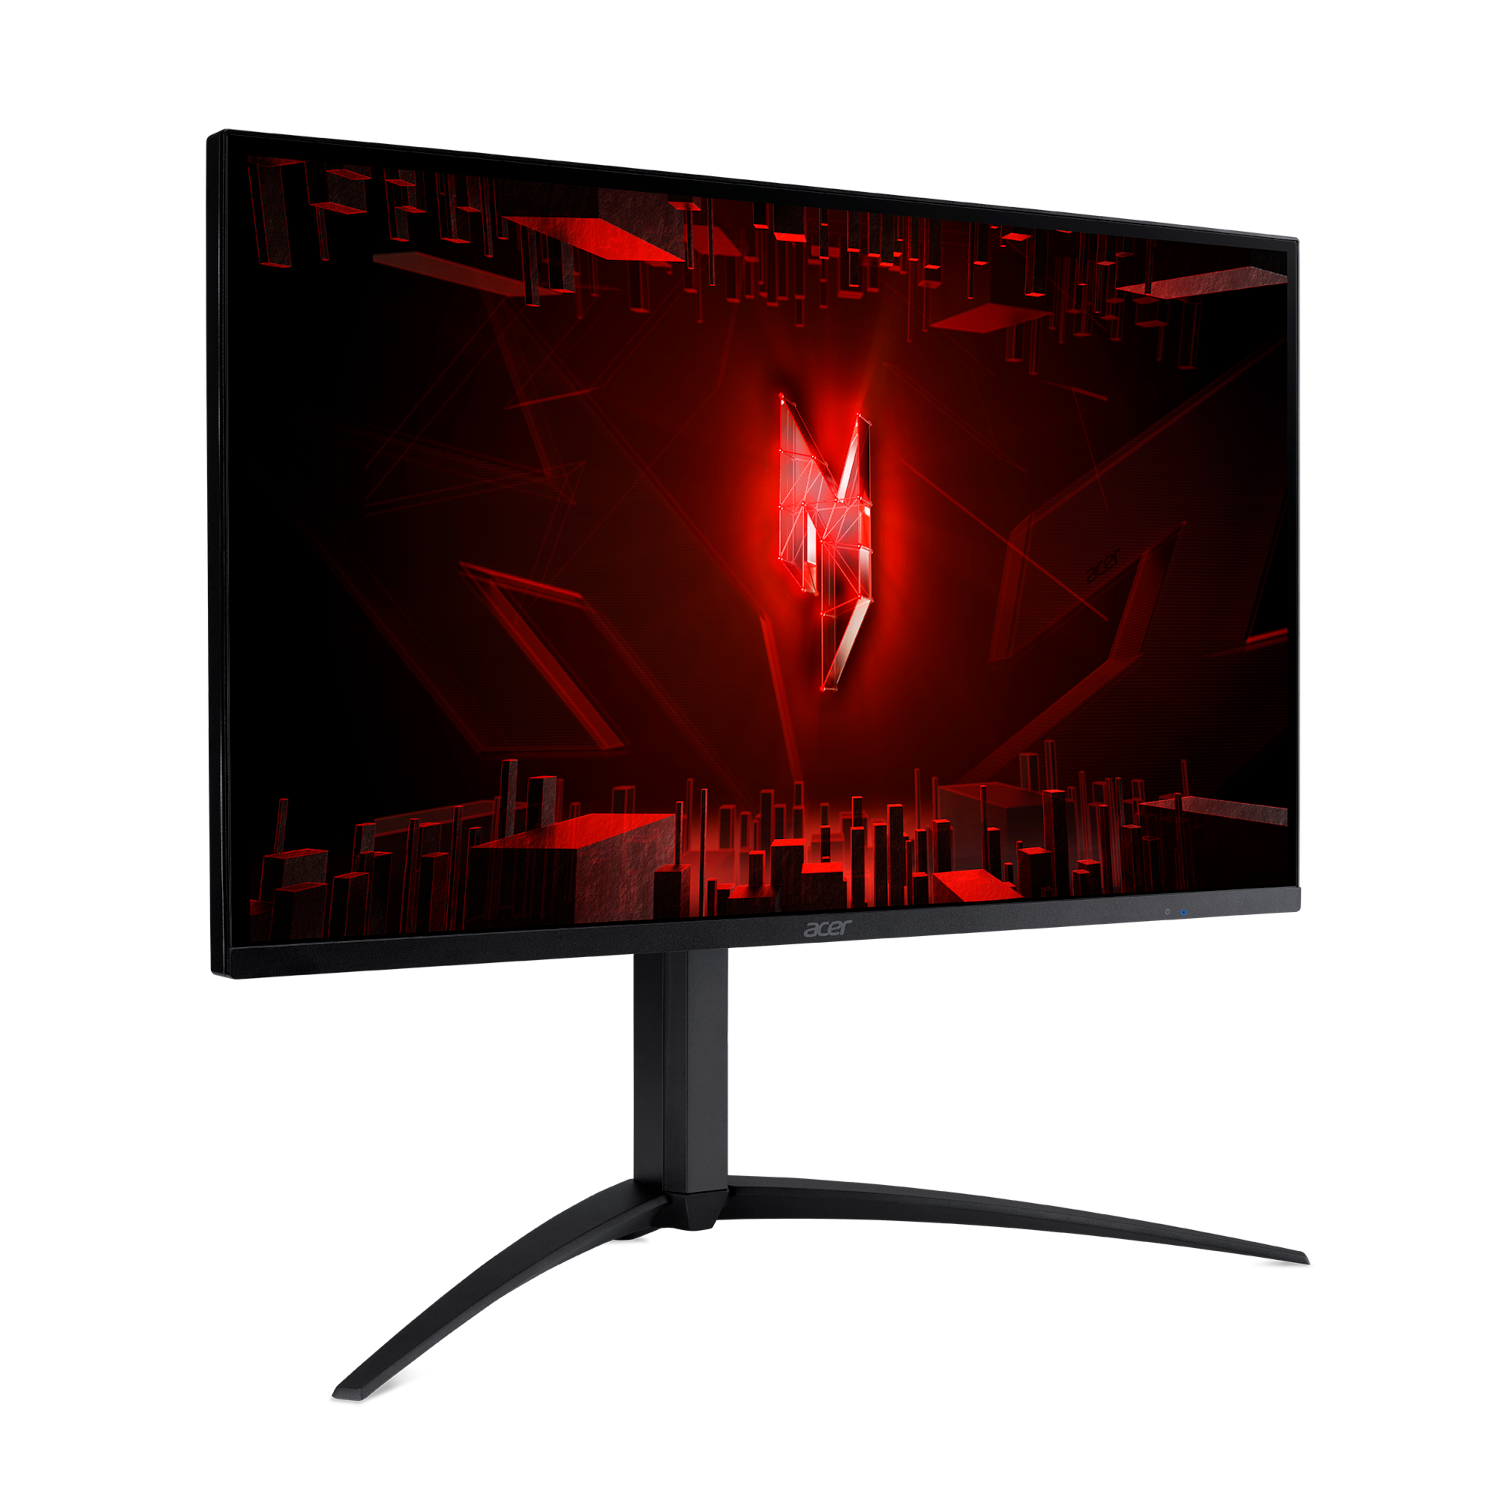 Acer Nitro (XV275UP3biiprx) 27" QHD Gaming Monitor 68,6 cm (27,0 Zoll), MiniLED, 170Hz, 600nits native/1000nits peak, 2x HDMI, 1x DP, Audio Out von Acer